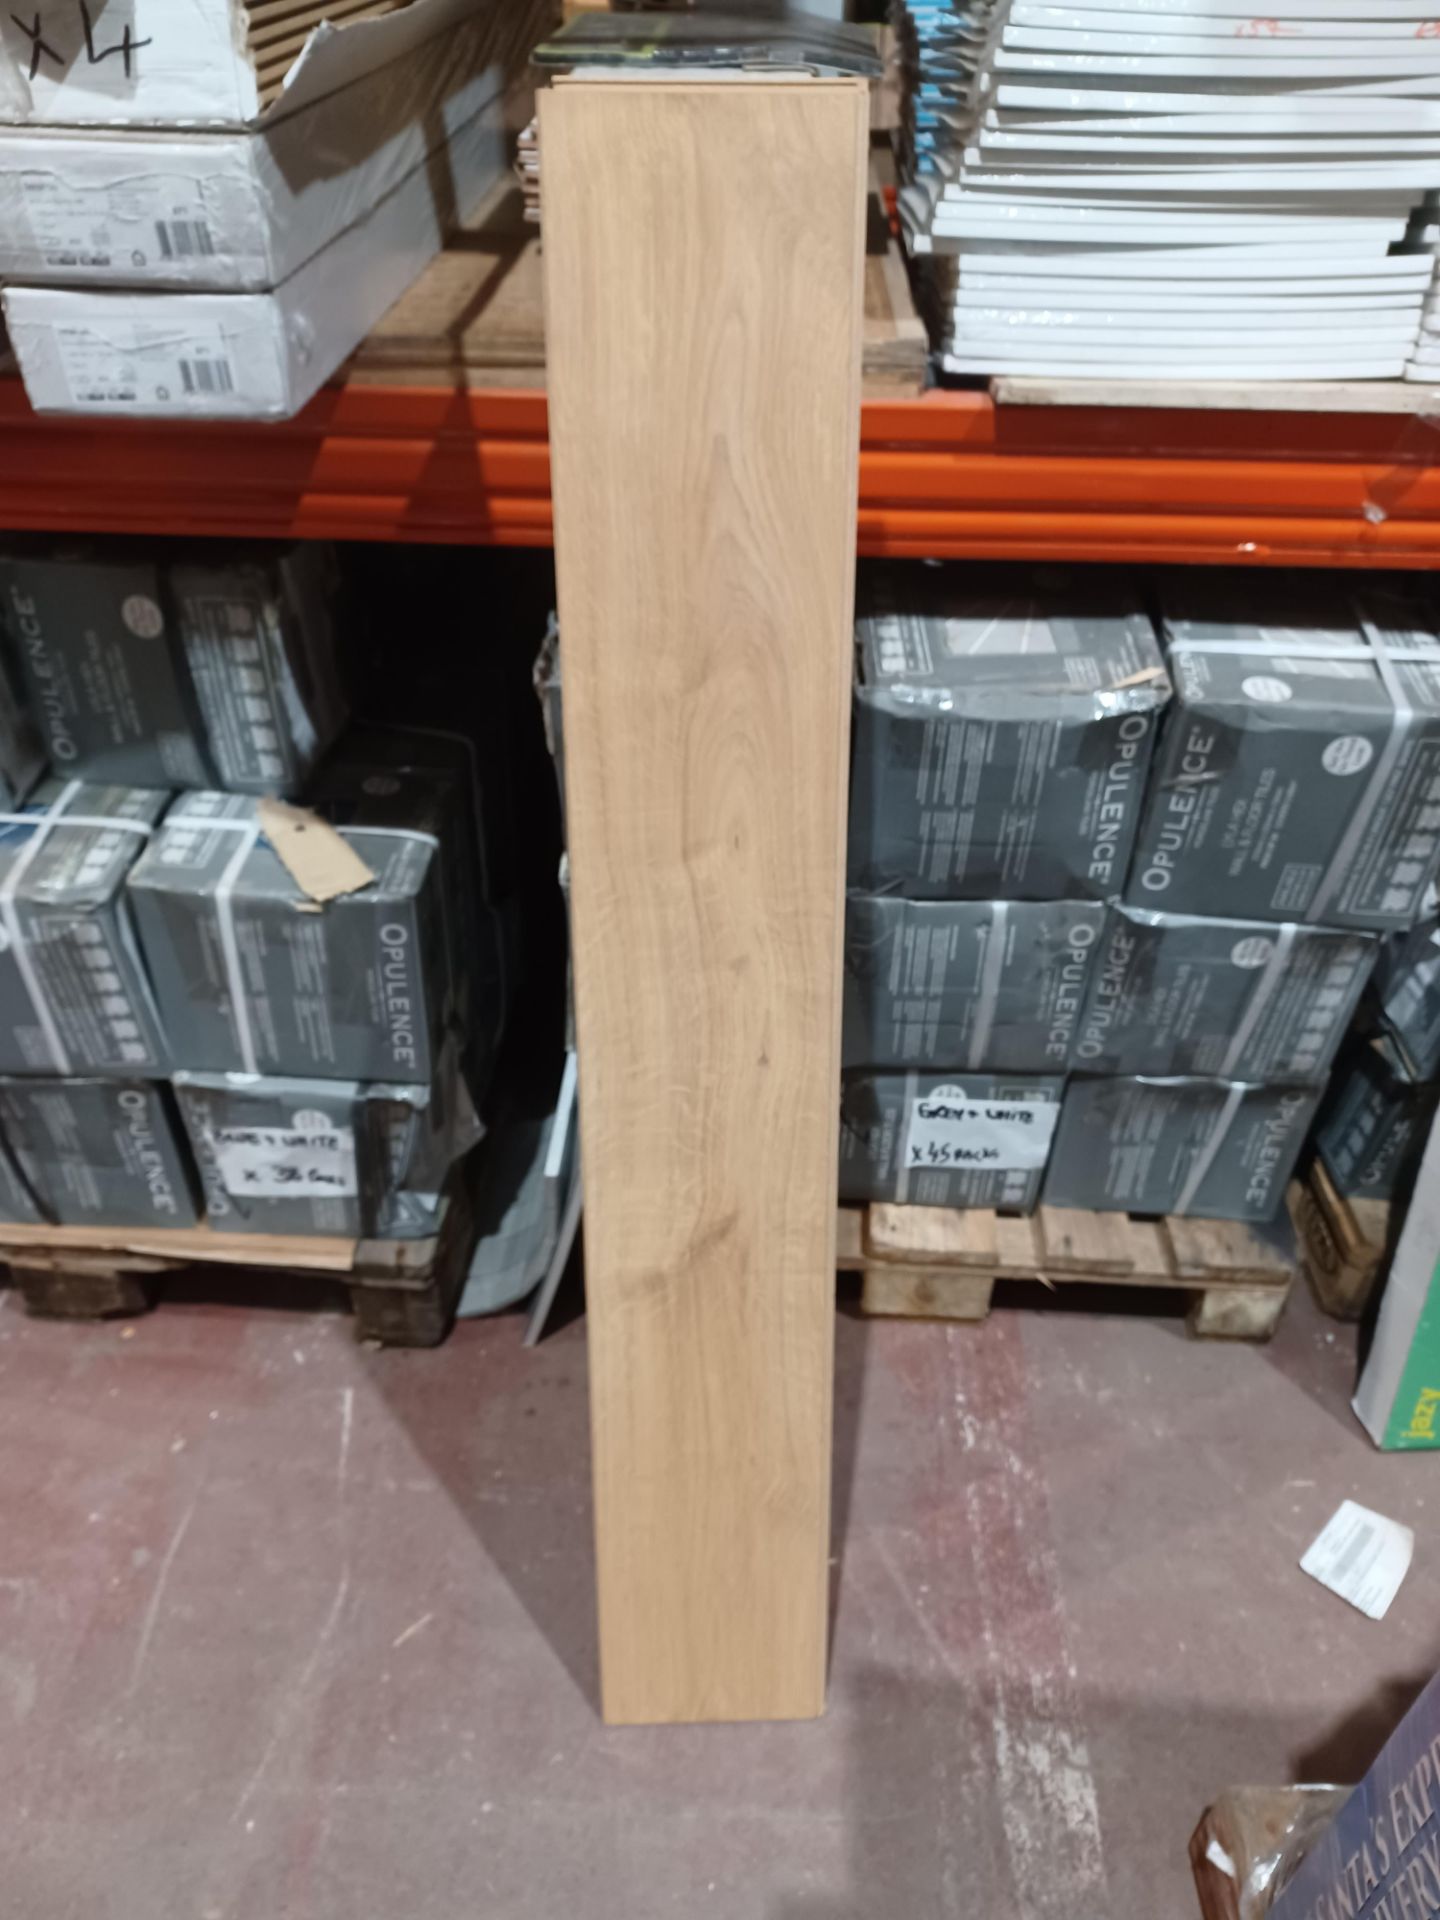 10 x Packs of Ravensdale Oak Flooring 1.48m2 giving this a coverage of 14.8m2 - R14